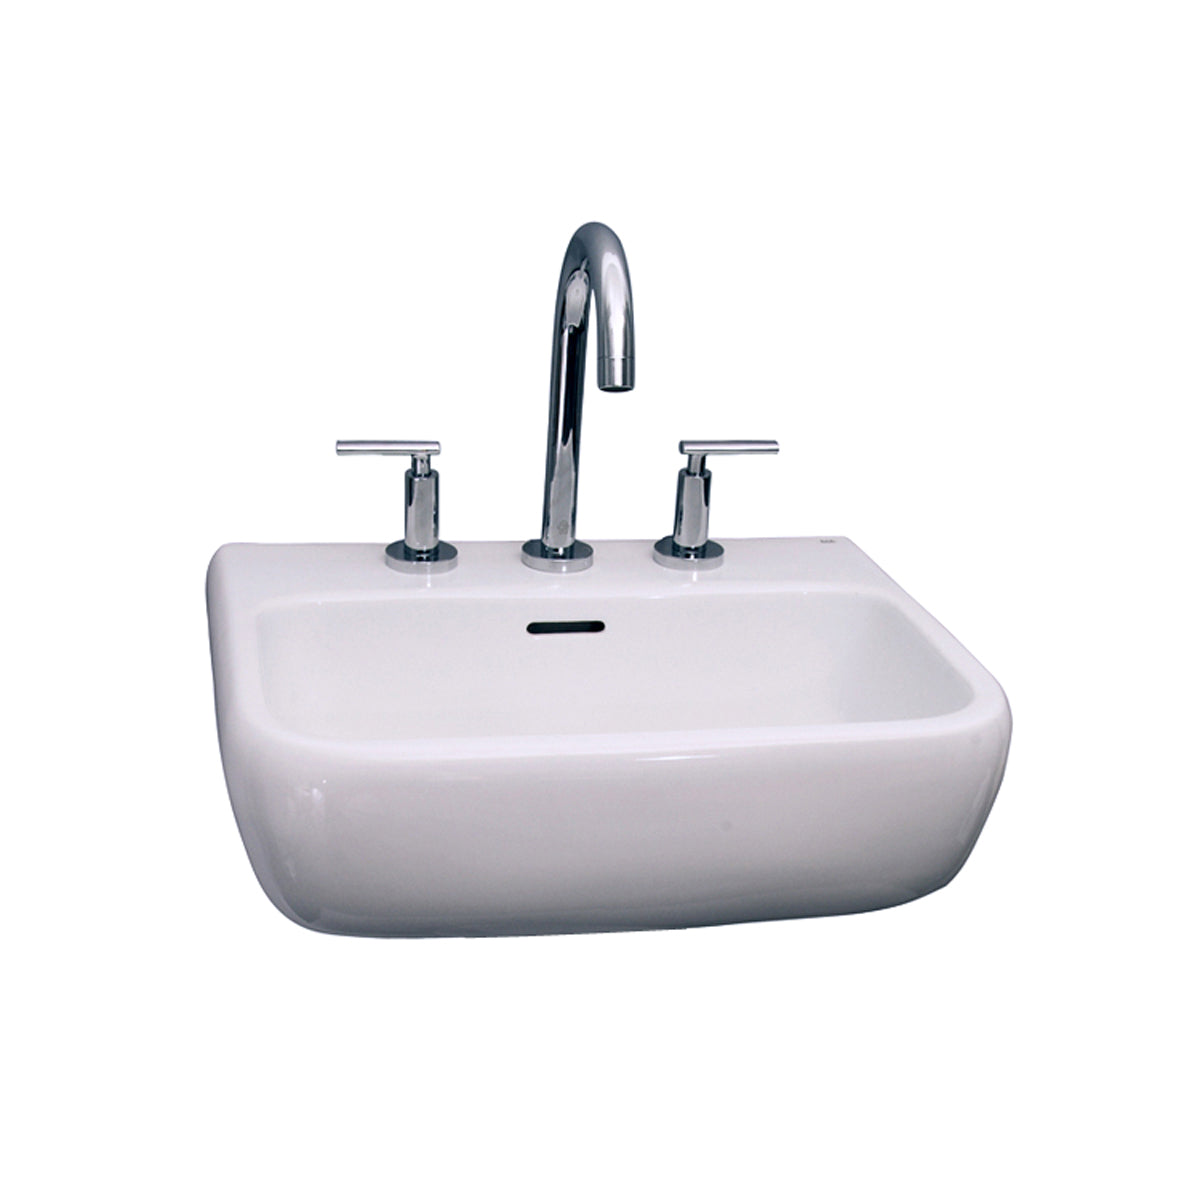 Metropolitan 600 Wall Hung Sink in White for 8" Widespread